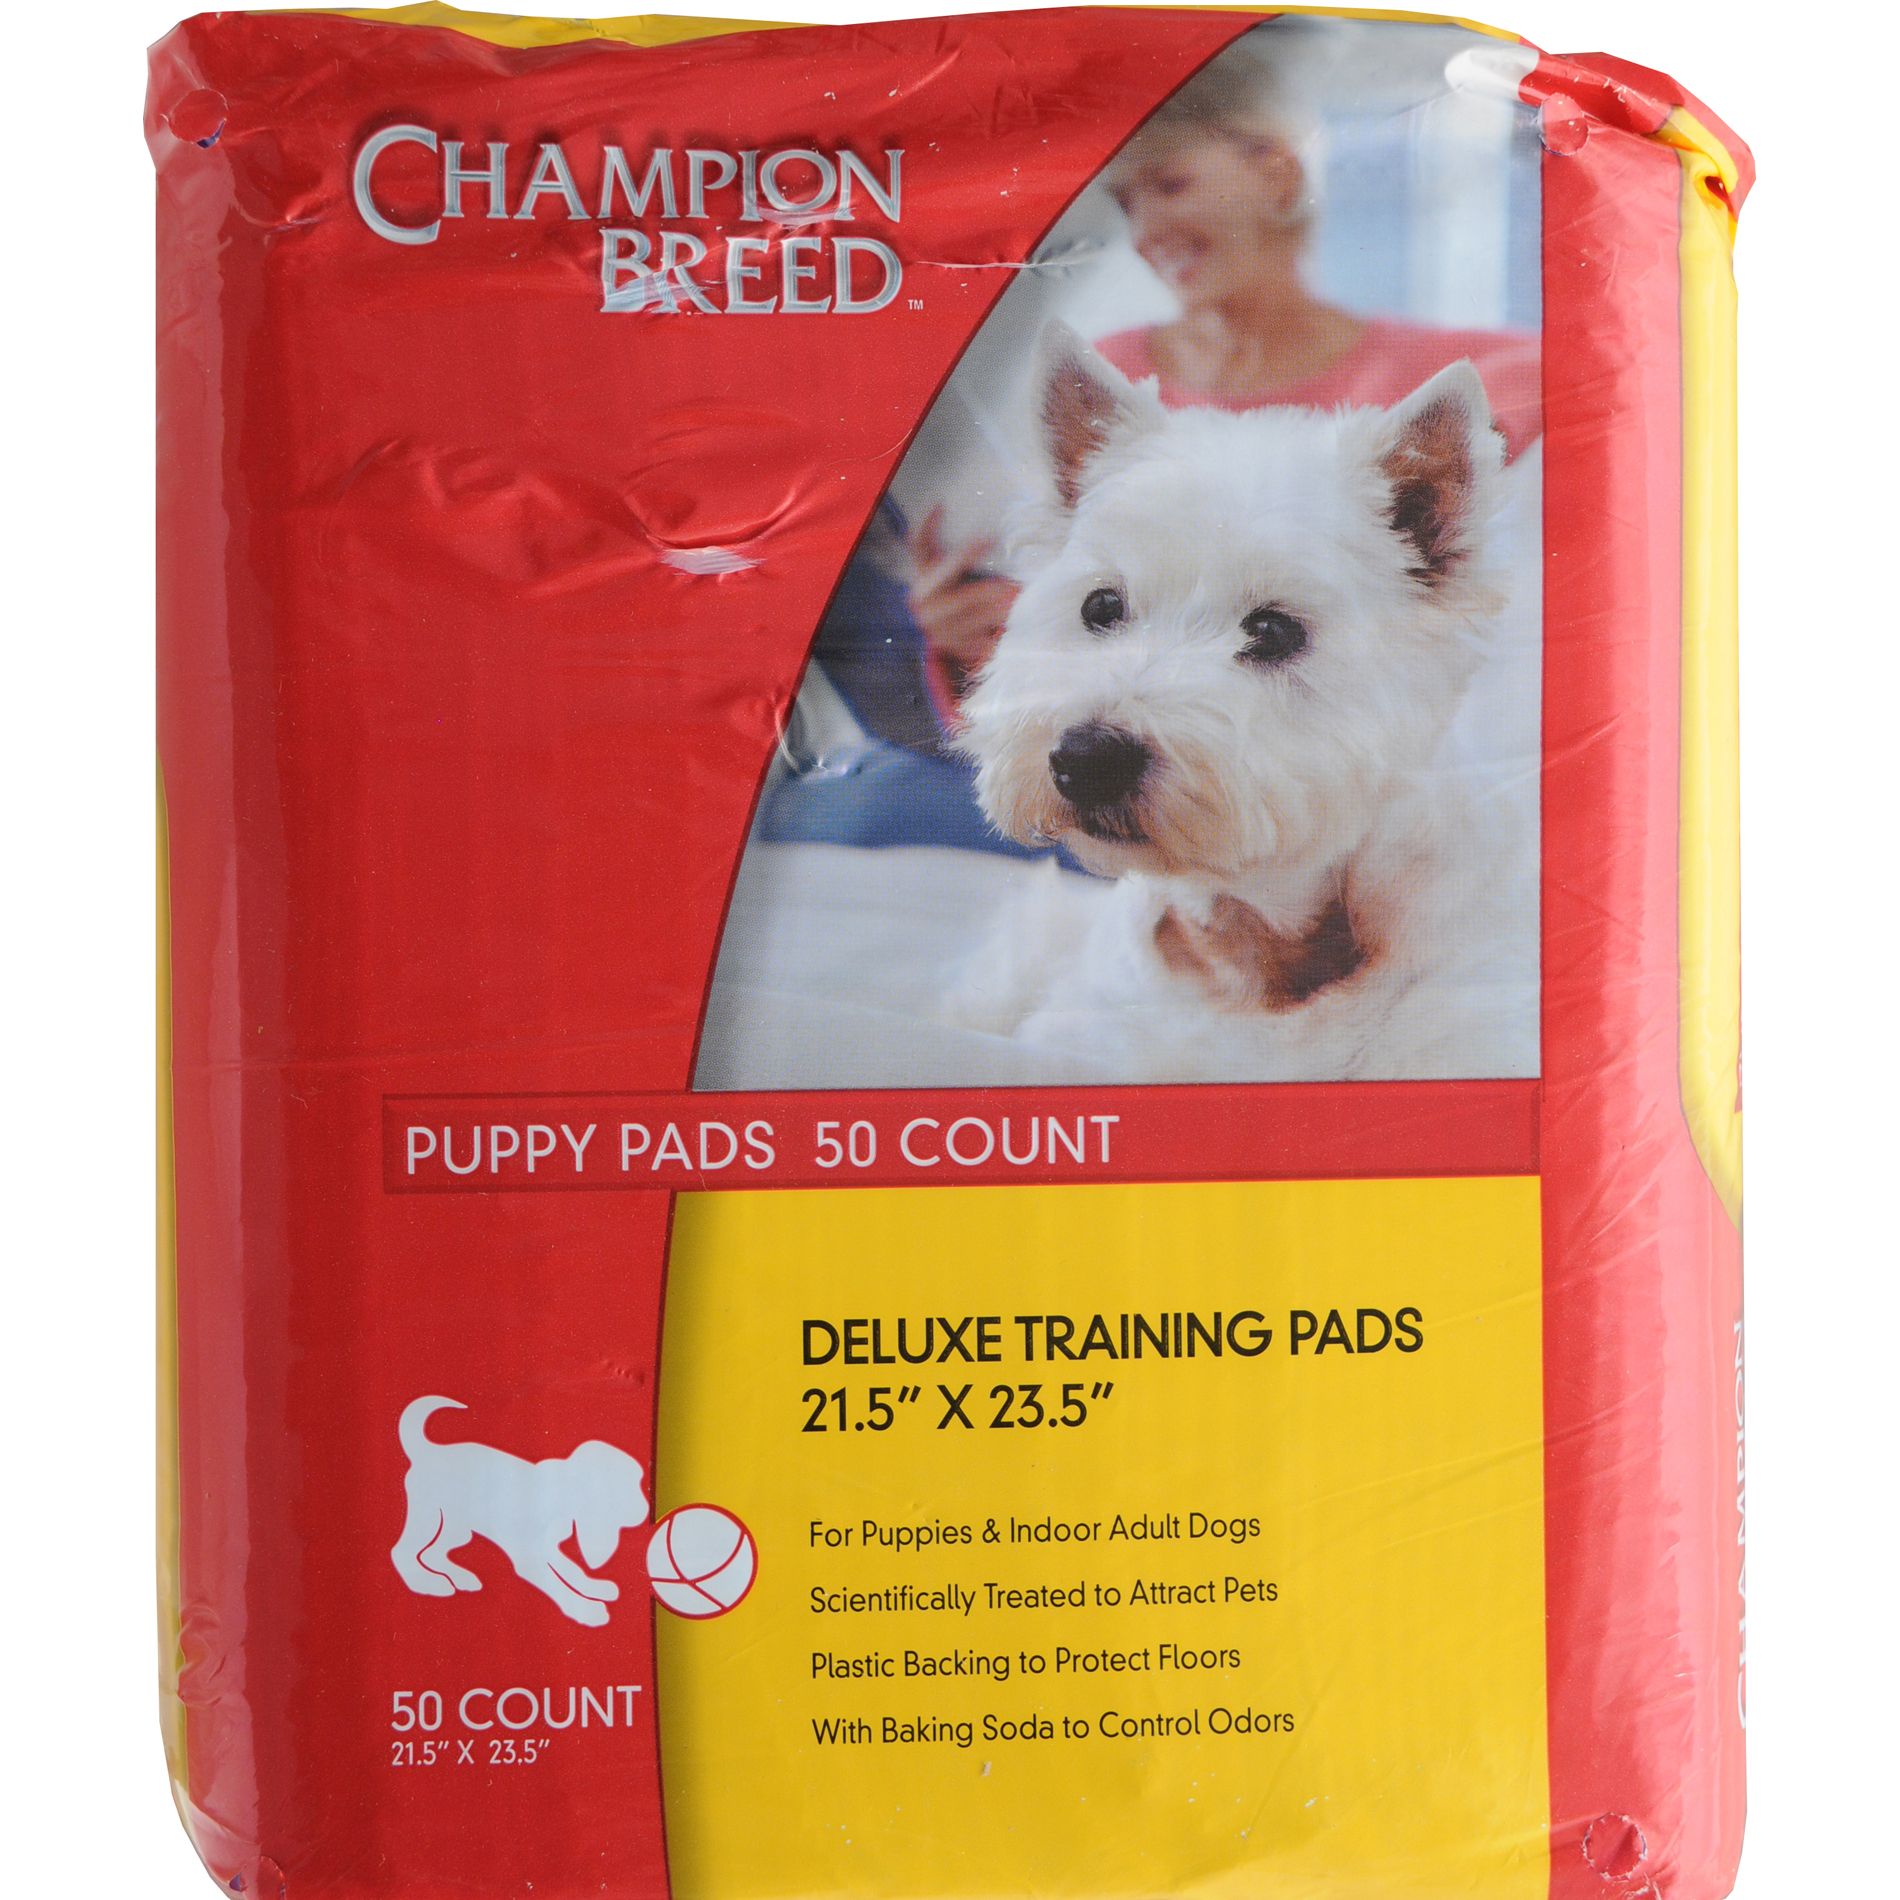 Champion Breed Deluxe Puppy Training Pads 50 count